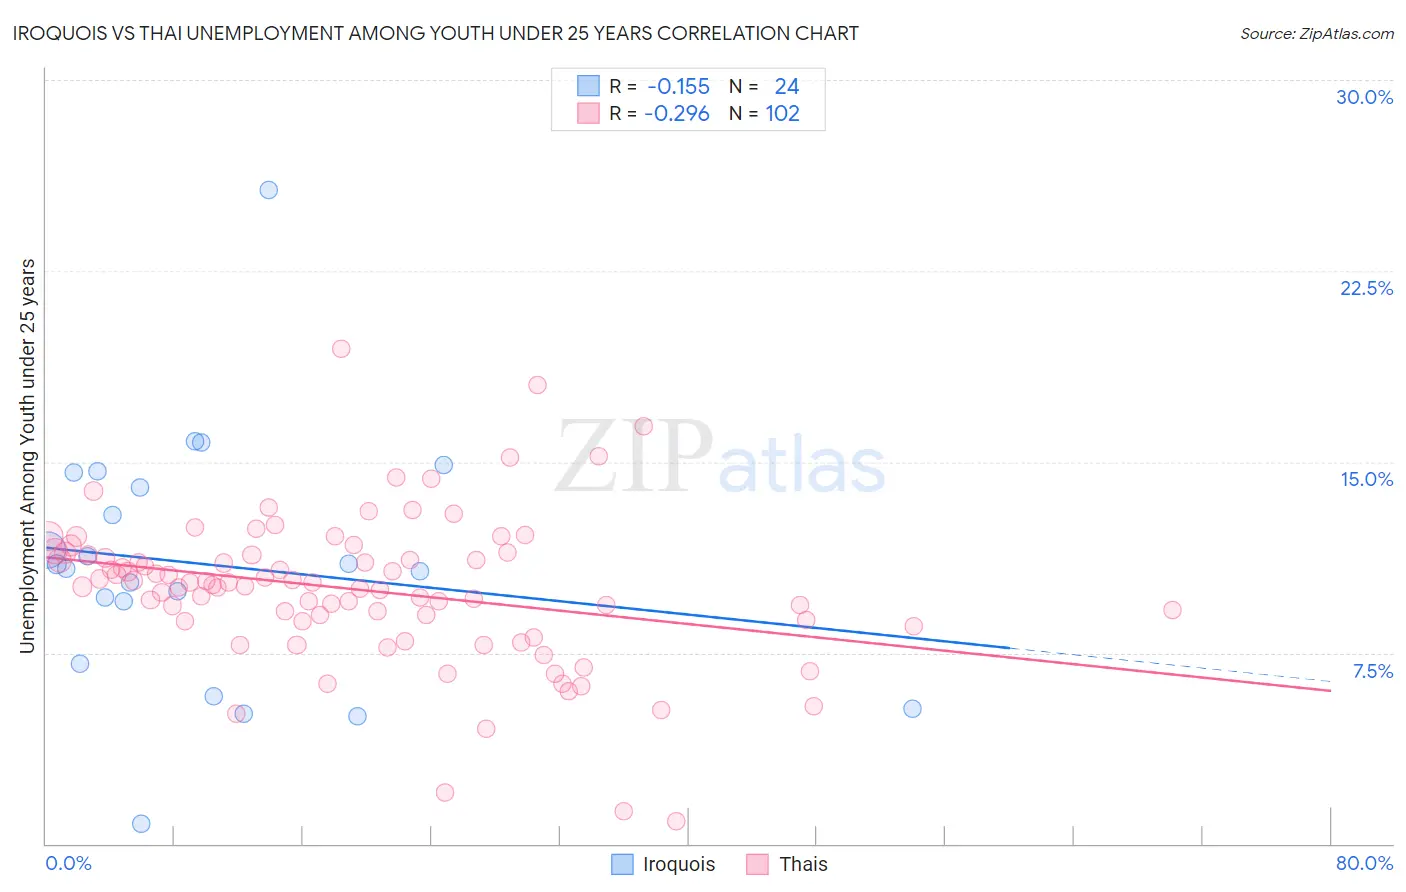 Iroquois vs Thai Unemployment Among Youth under 25 years